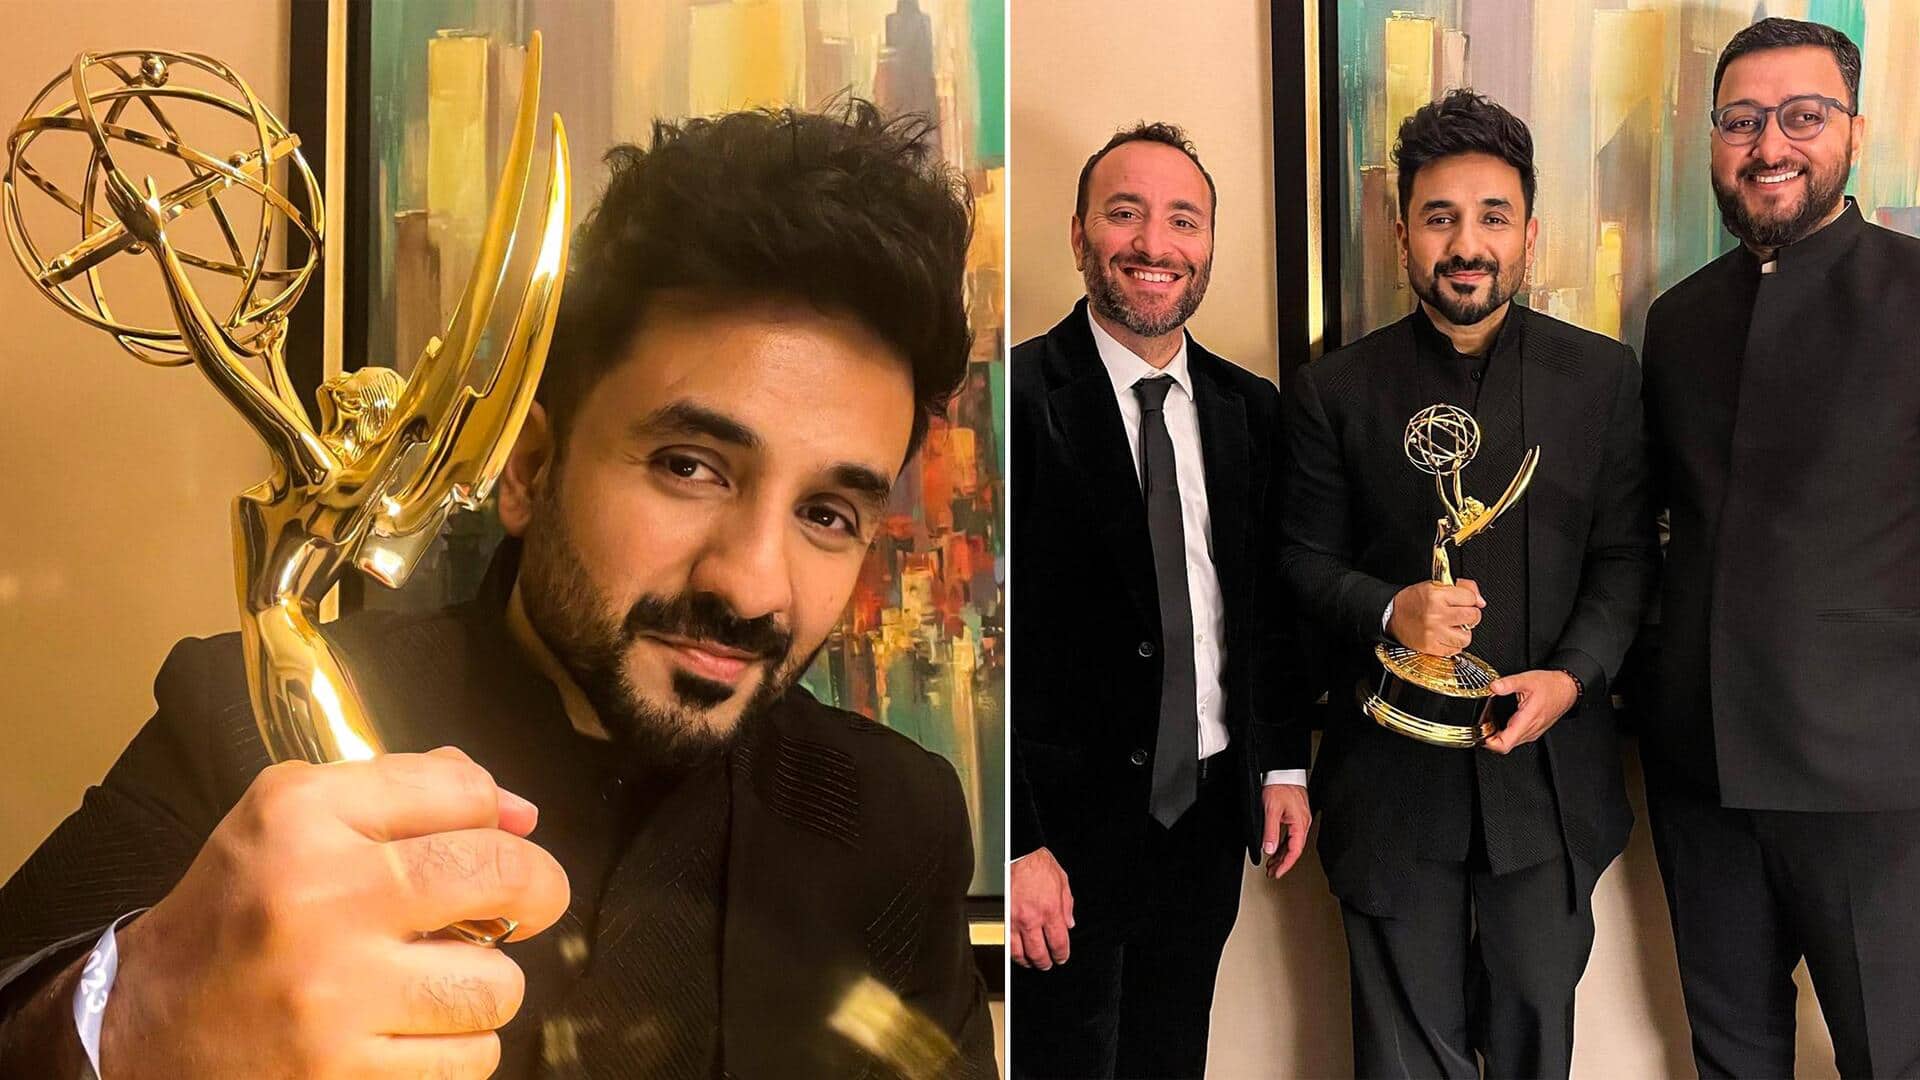 International Emmy Awards: Vir Das secures win for comedy series